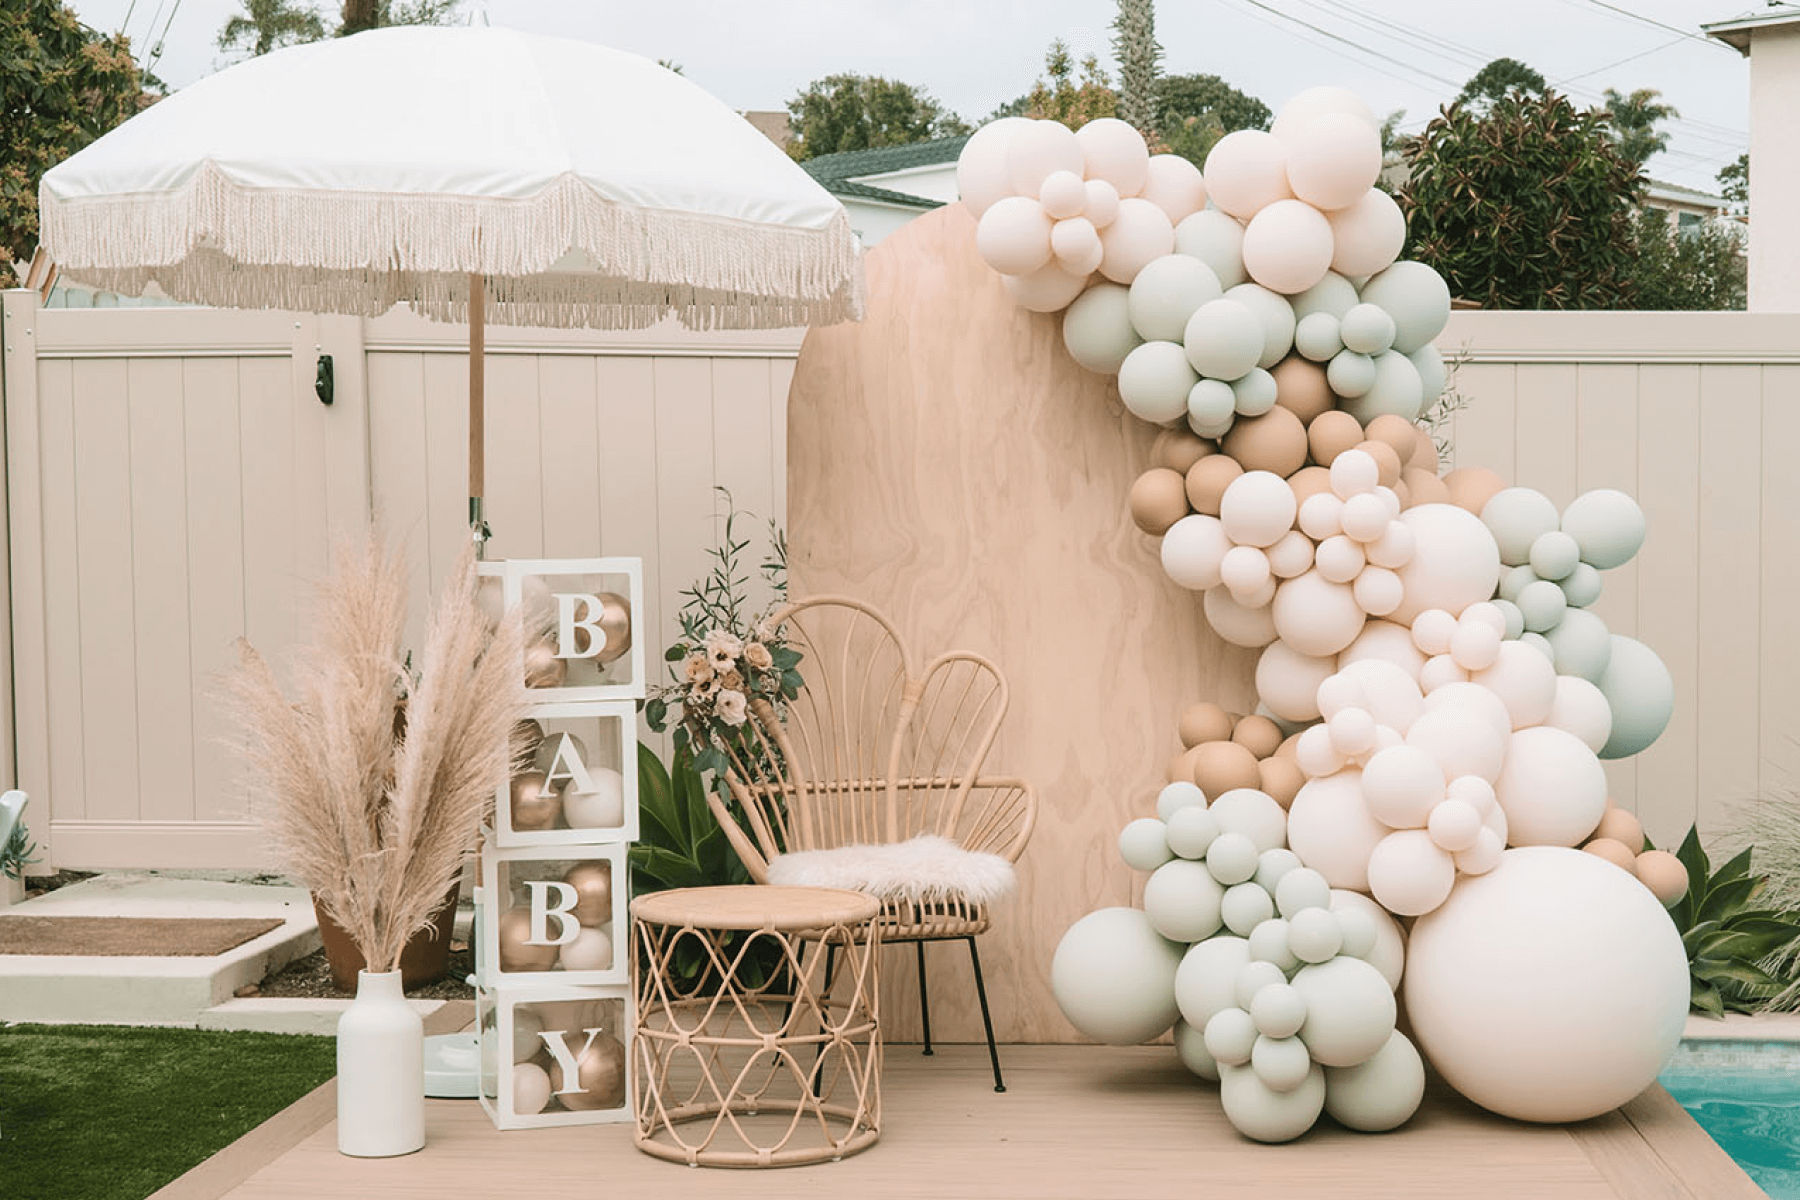 A pastel balloon installation with a pool umbrella, rattan chair, and decorative BABY blocks.